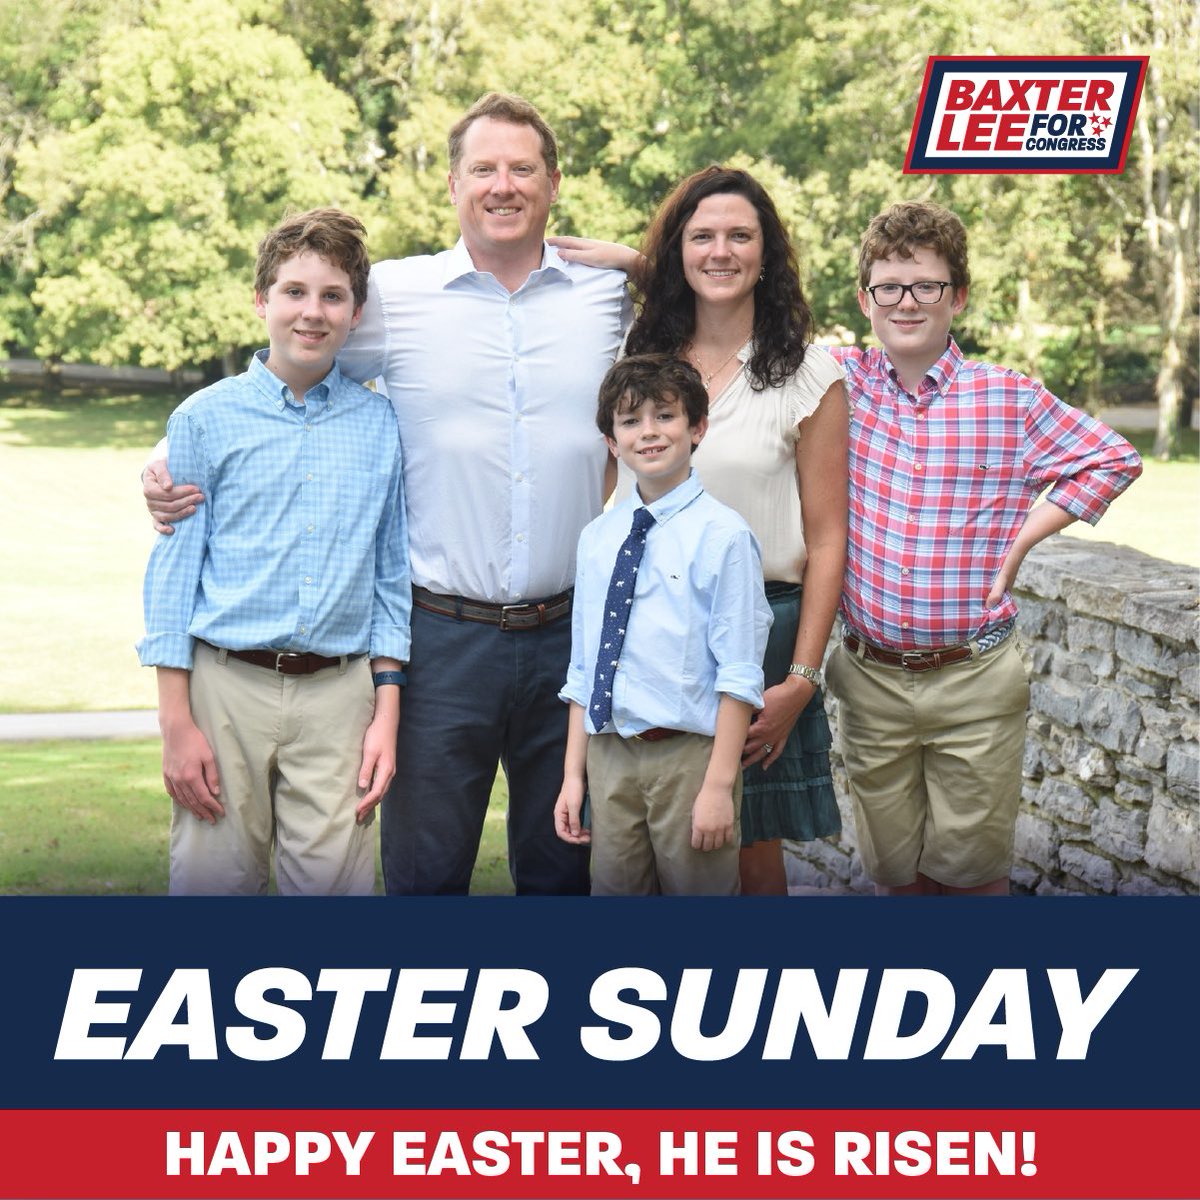 The stone was rolled away! He is Risen! From my family to yours, we wish you a very happy Easter!